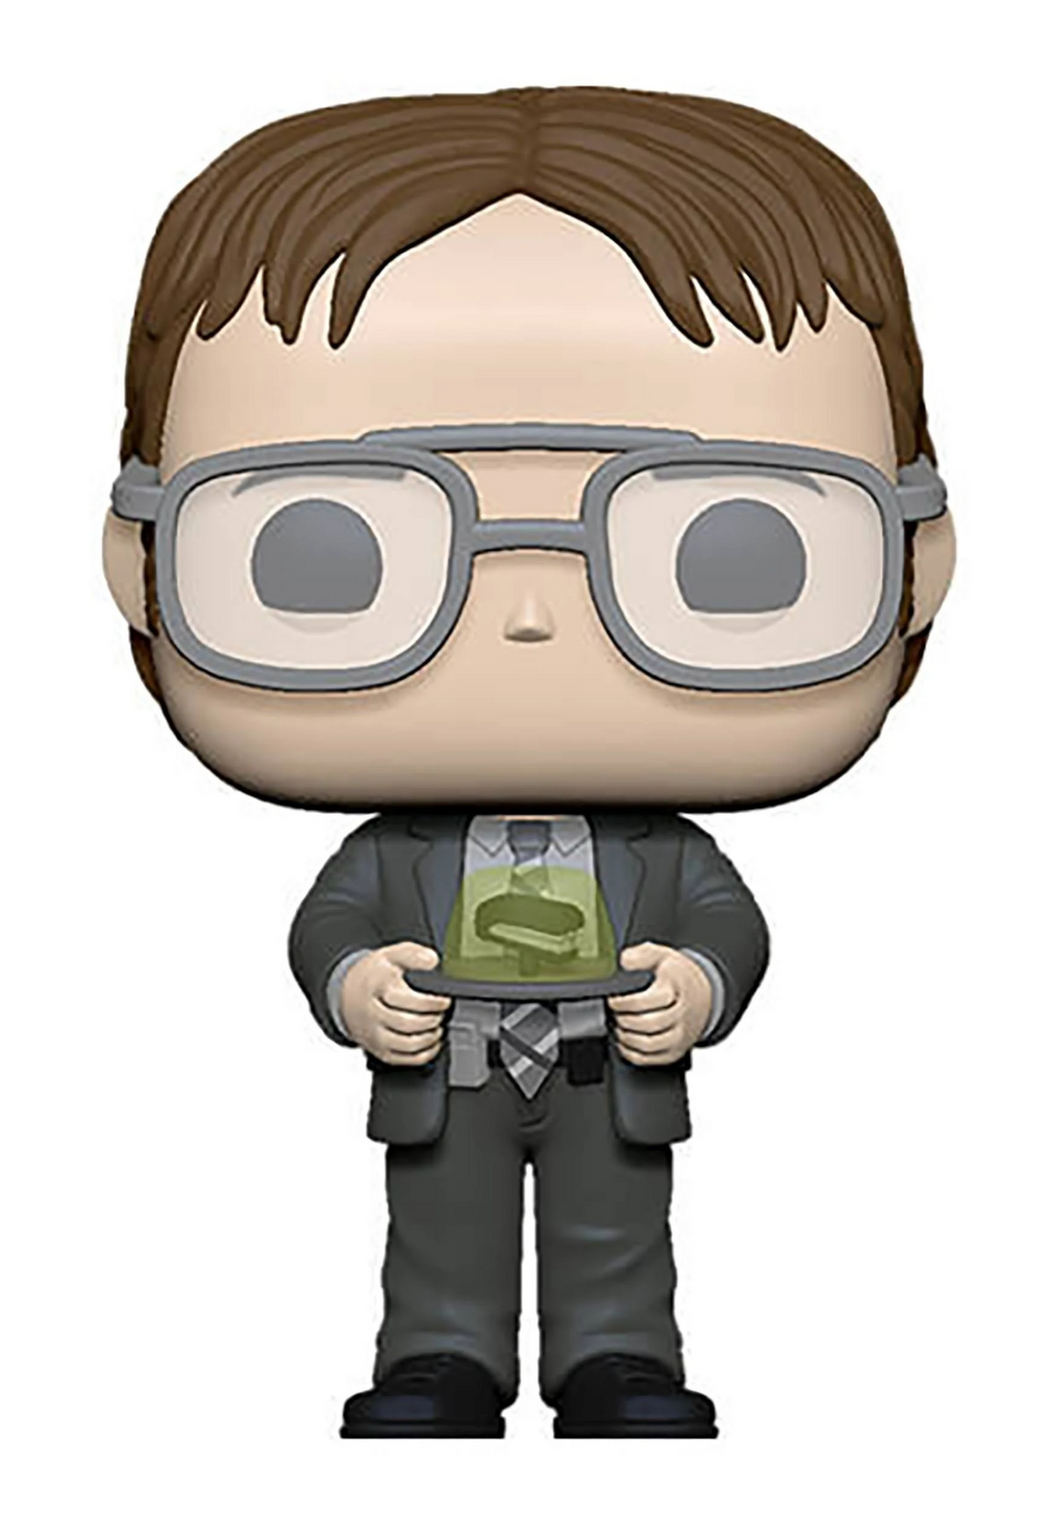 Funko Pop! Television The Office Dwight Schrute with Jello Stapler Vinyl Figure Full View